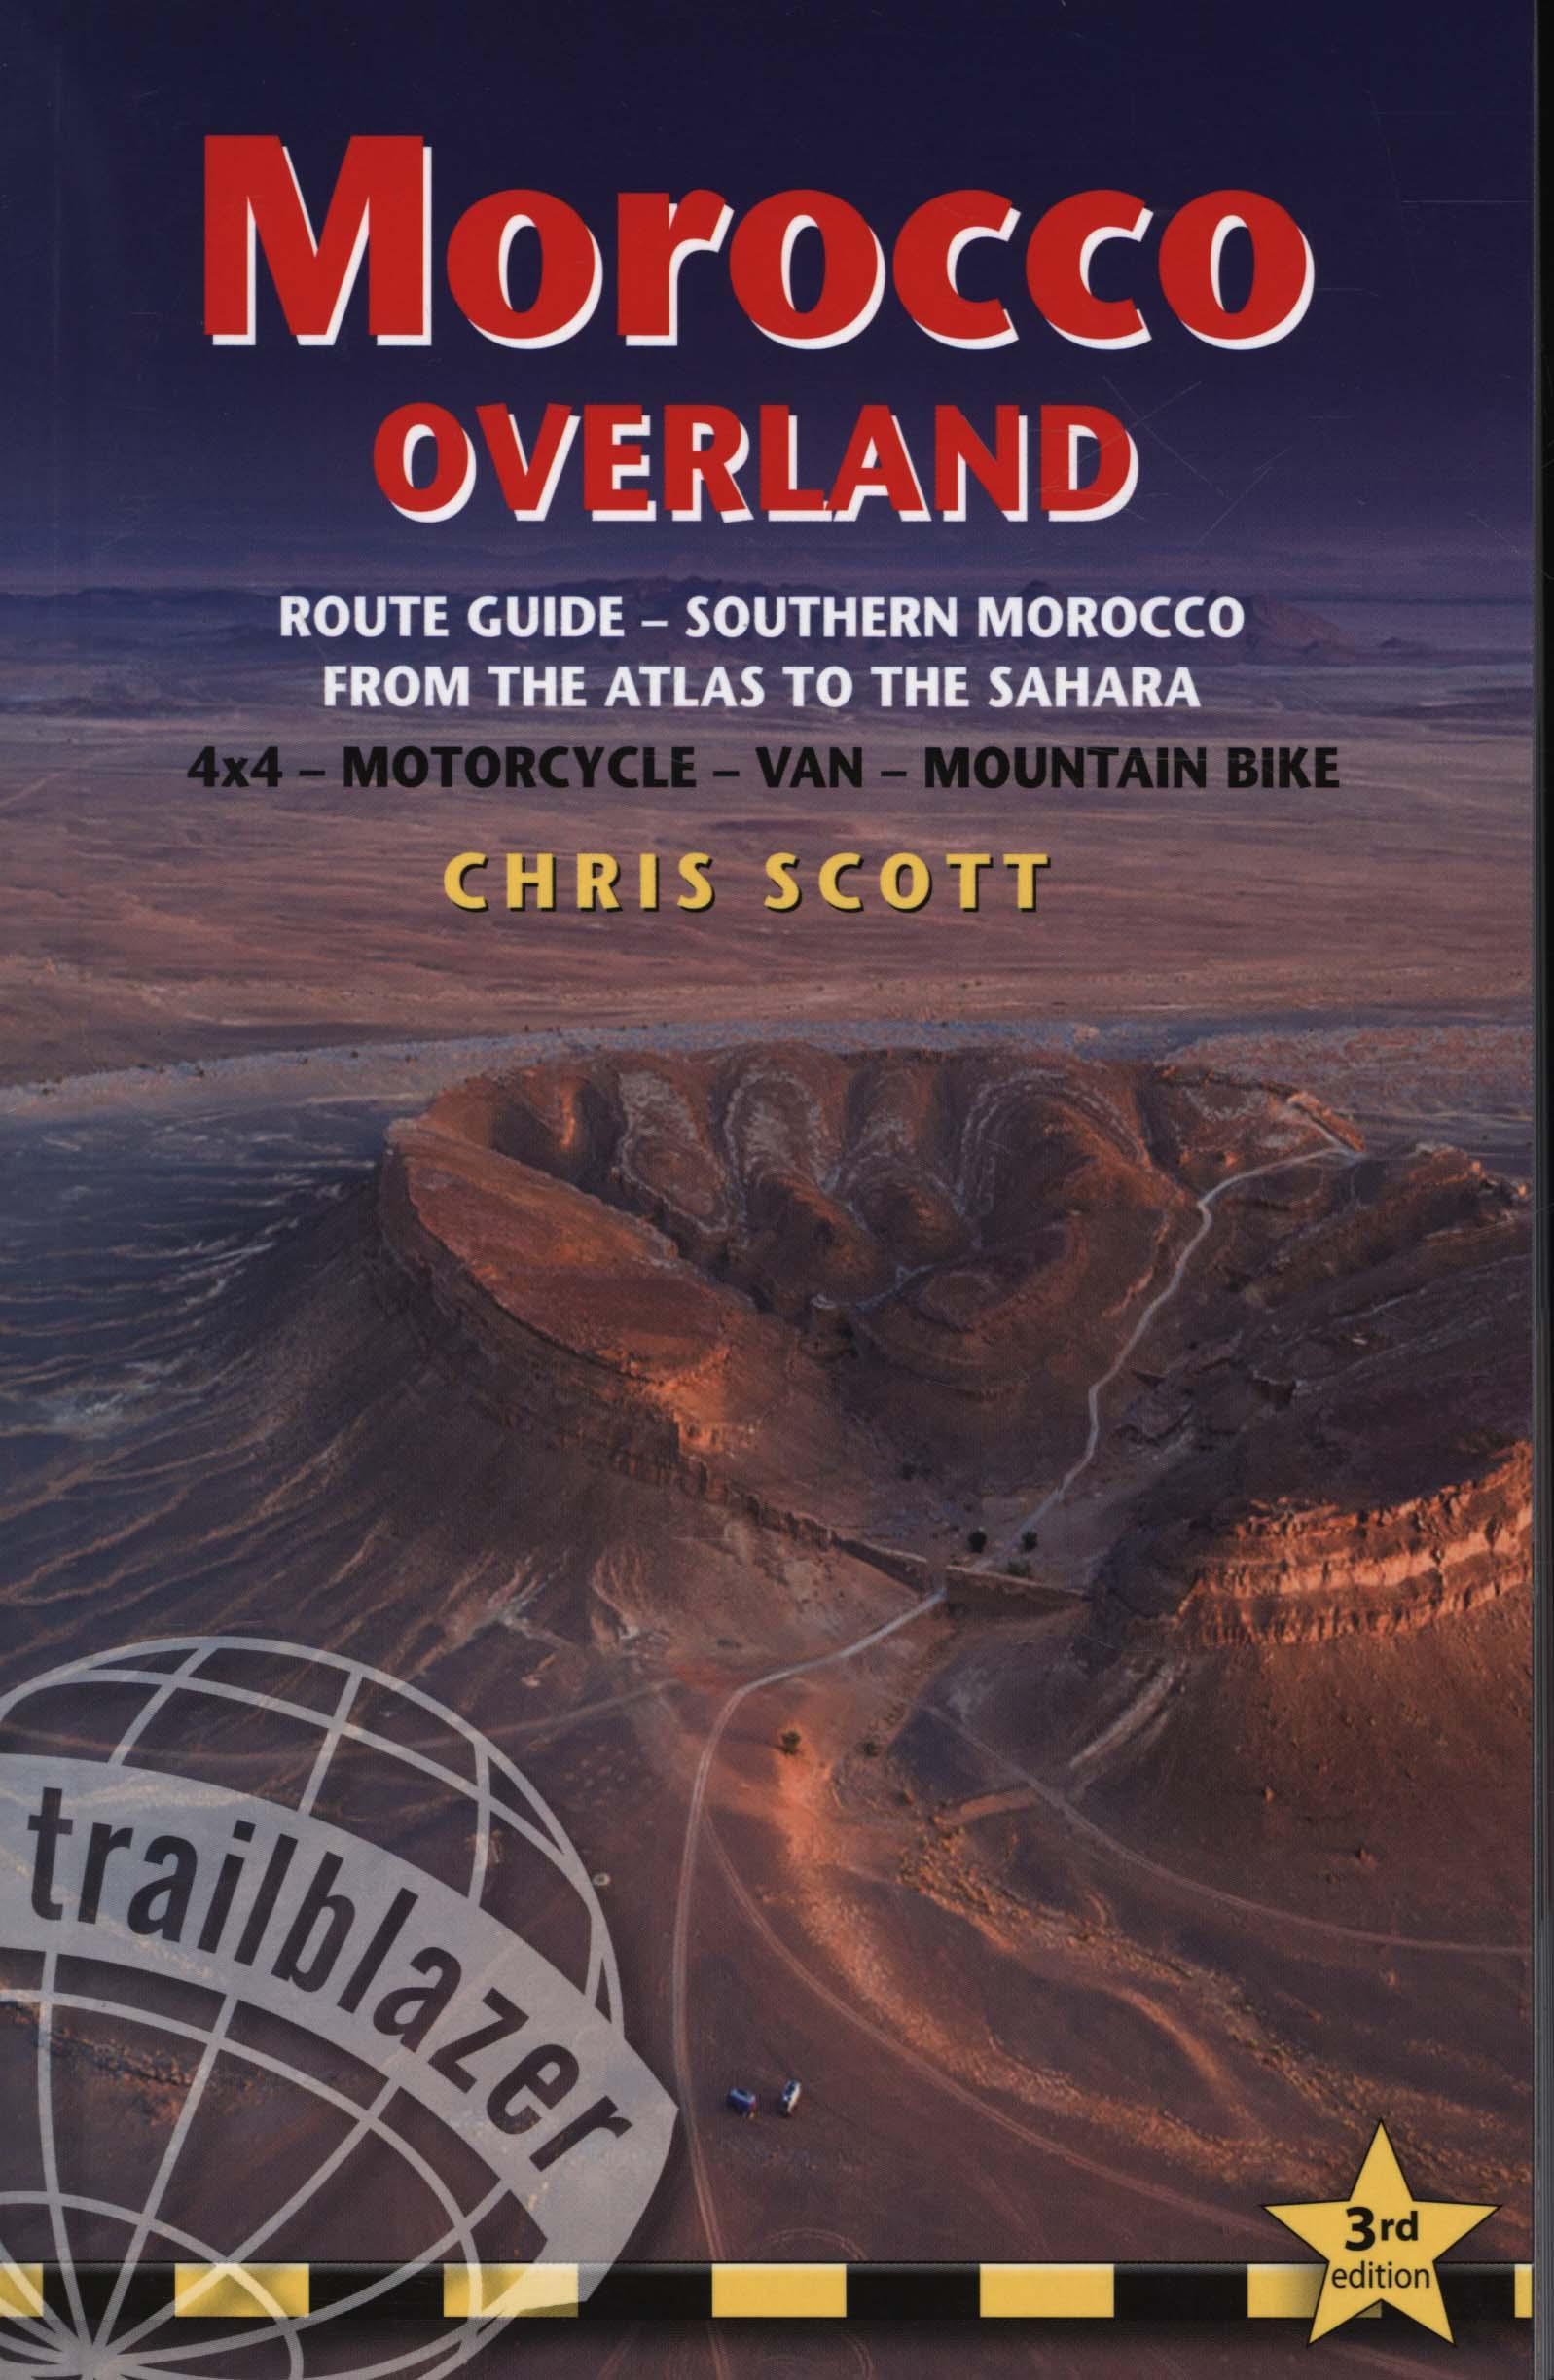 Morocco Overland Route Guide - From the Atlas to the Sahara: